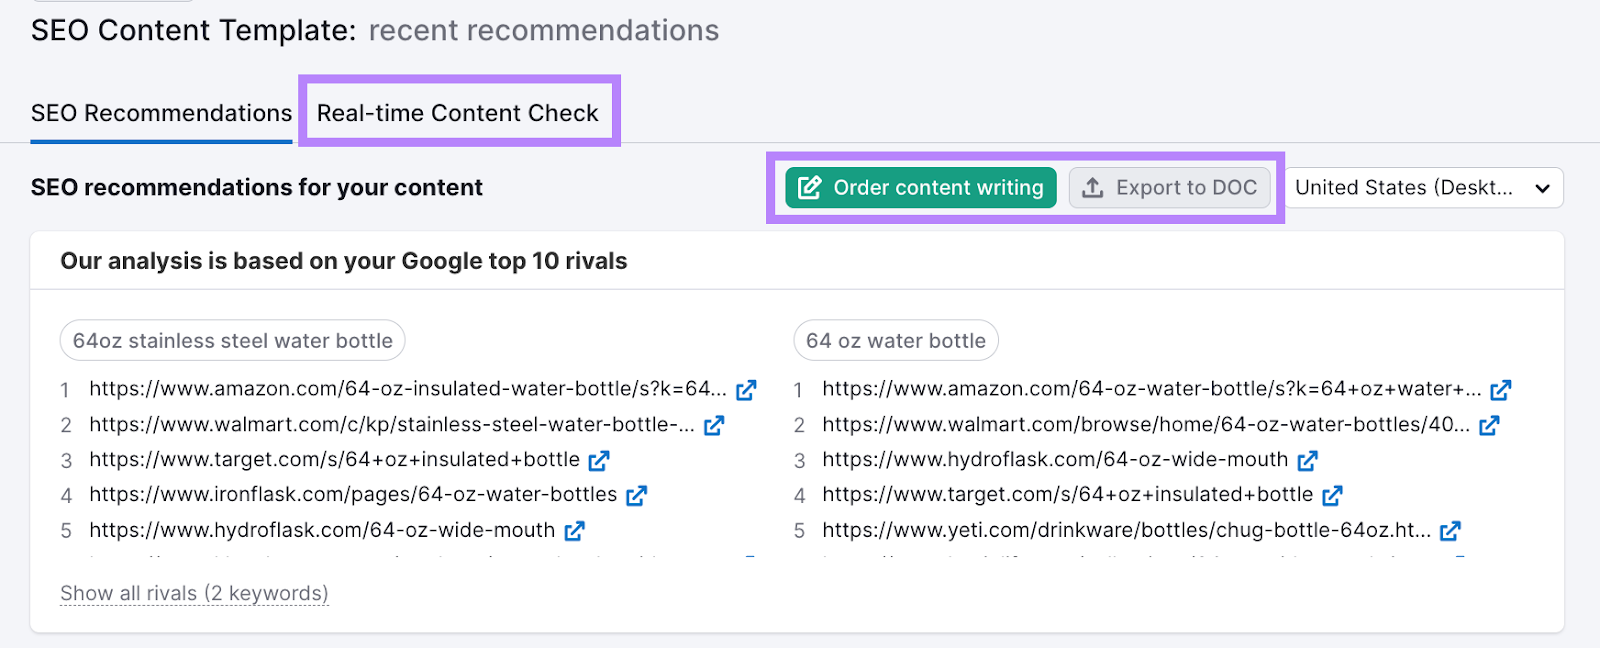 "Order content writing," "Export to DOC" and "Real-time Content Check" buttons highlighted in SEO Content Template tool